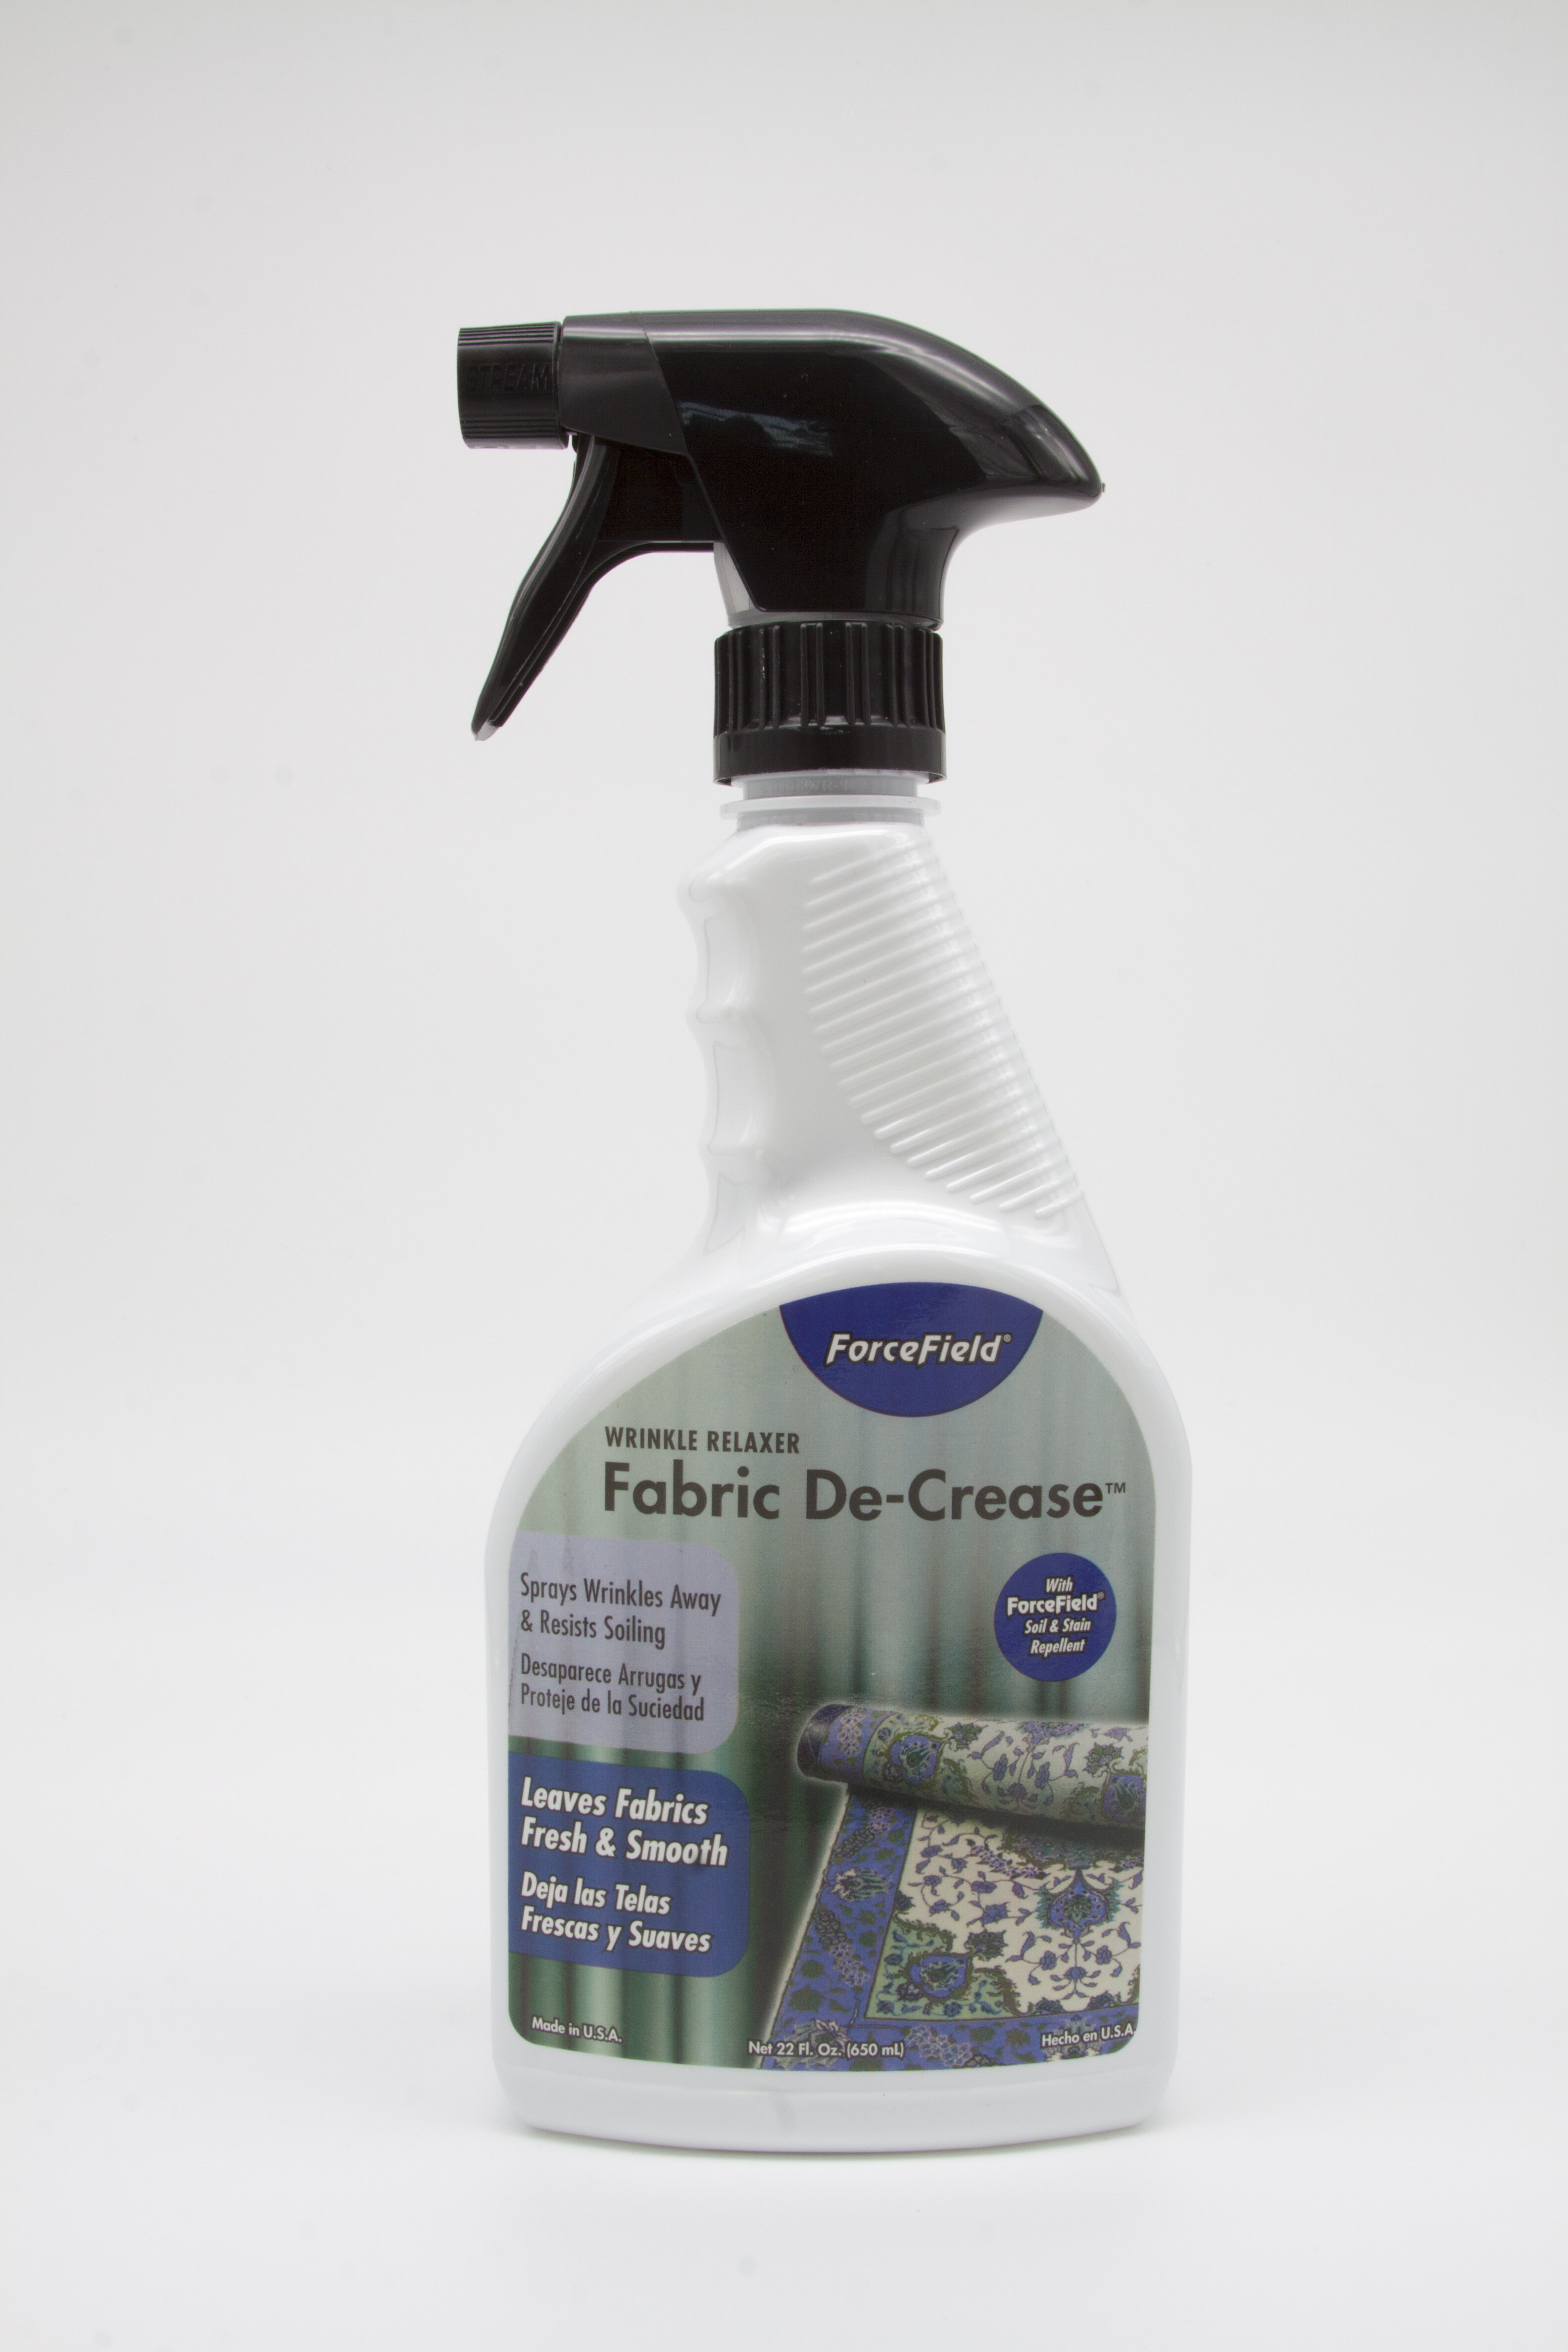 Forcefield Fabric Cleaner